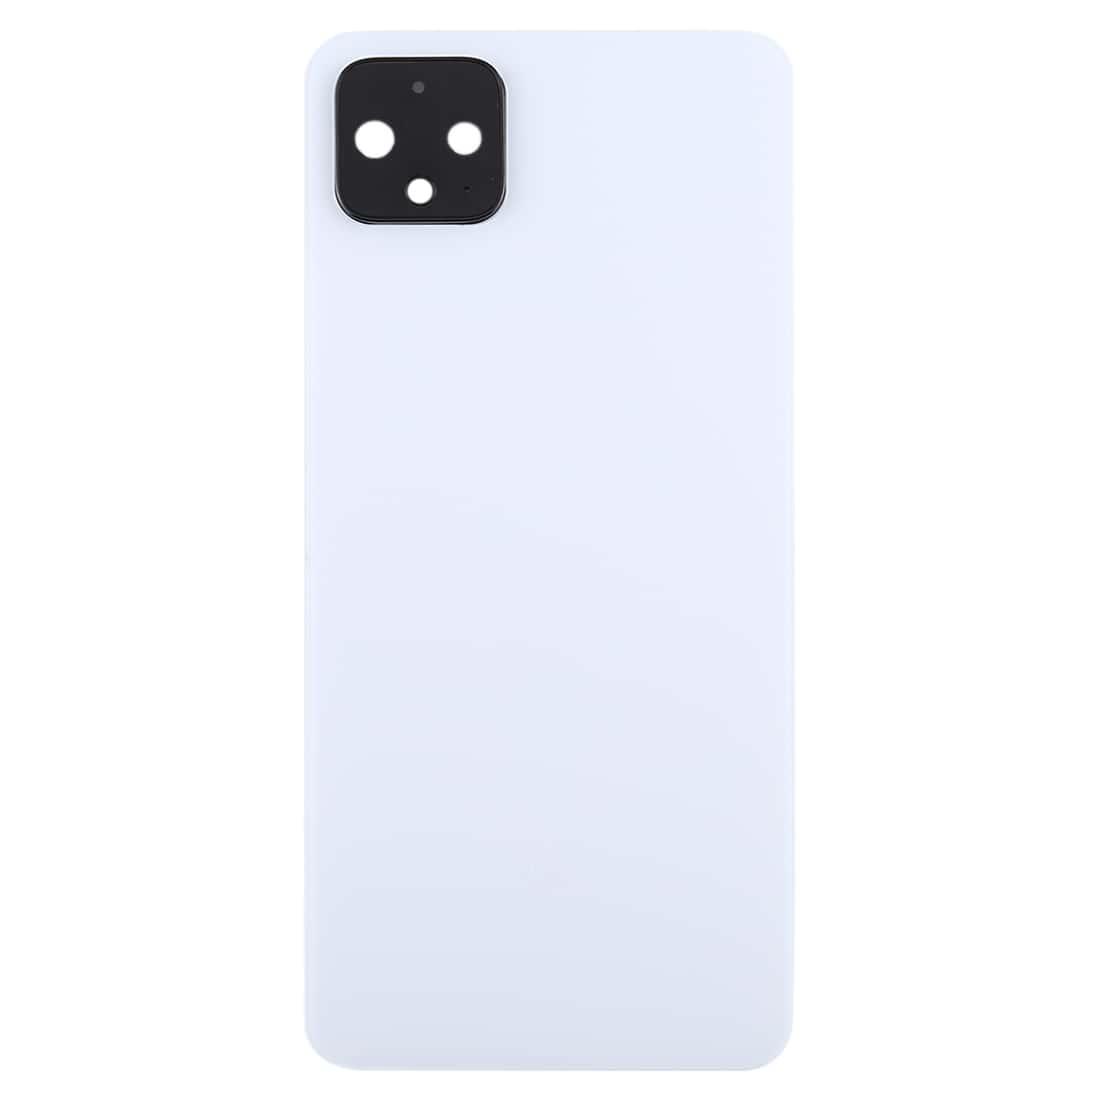 Back Glass Panel for Google Pixel 4XL White with Camera Lens